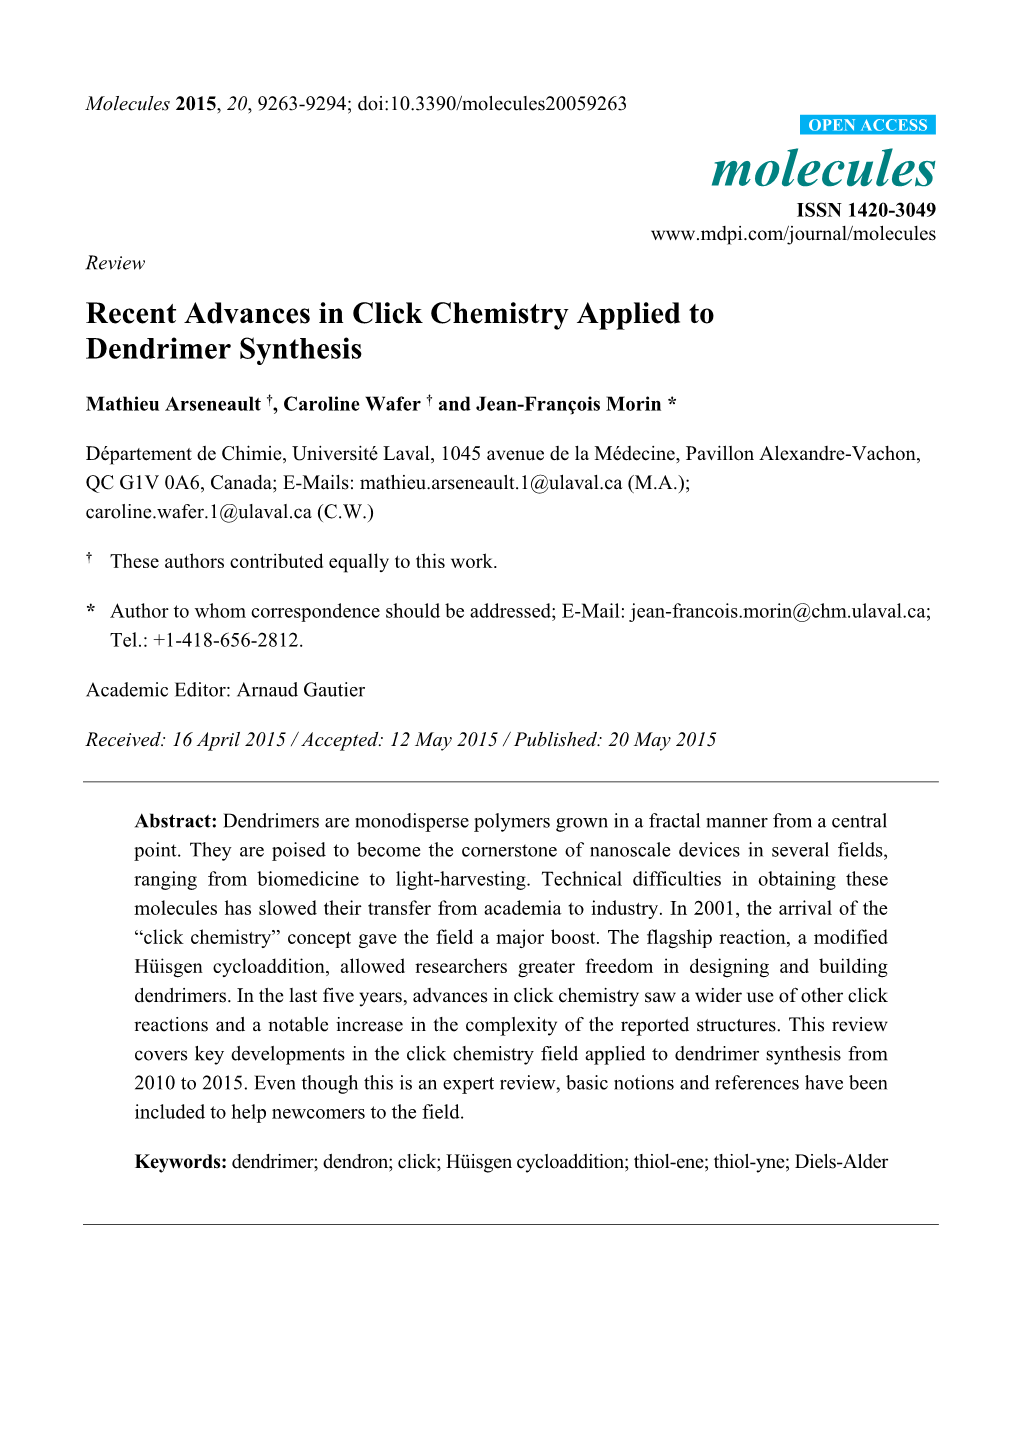 Recent Advances in Click Chemistry Applied to Dendrimer Synthesis